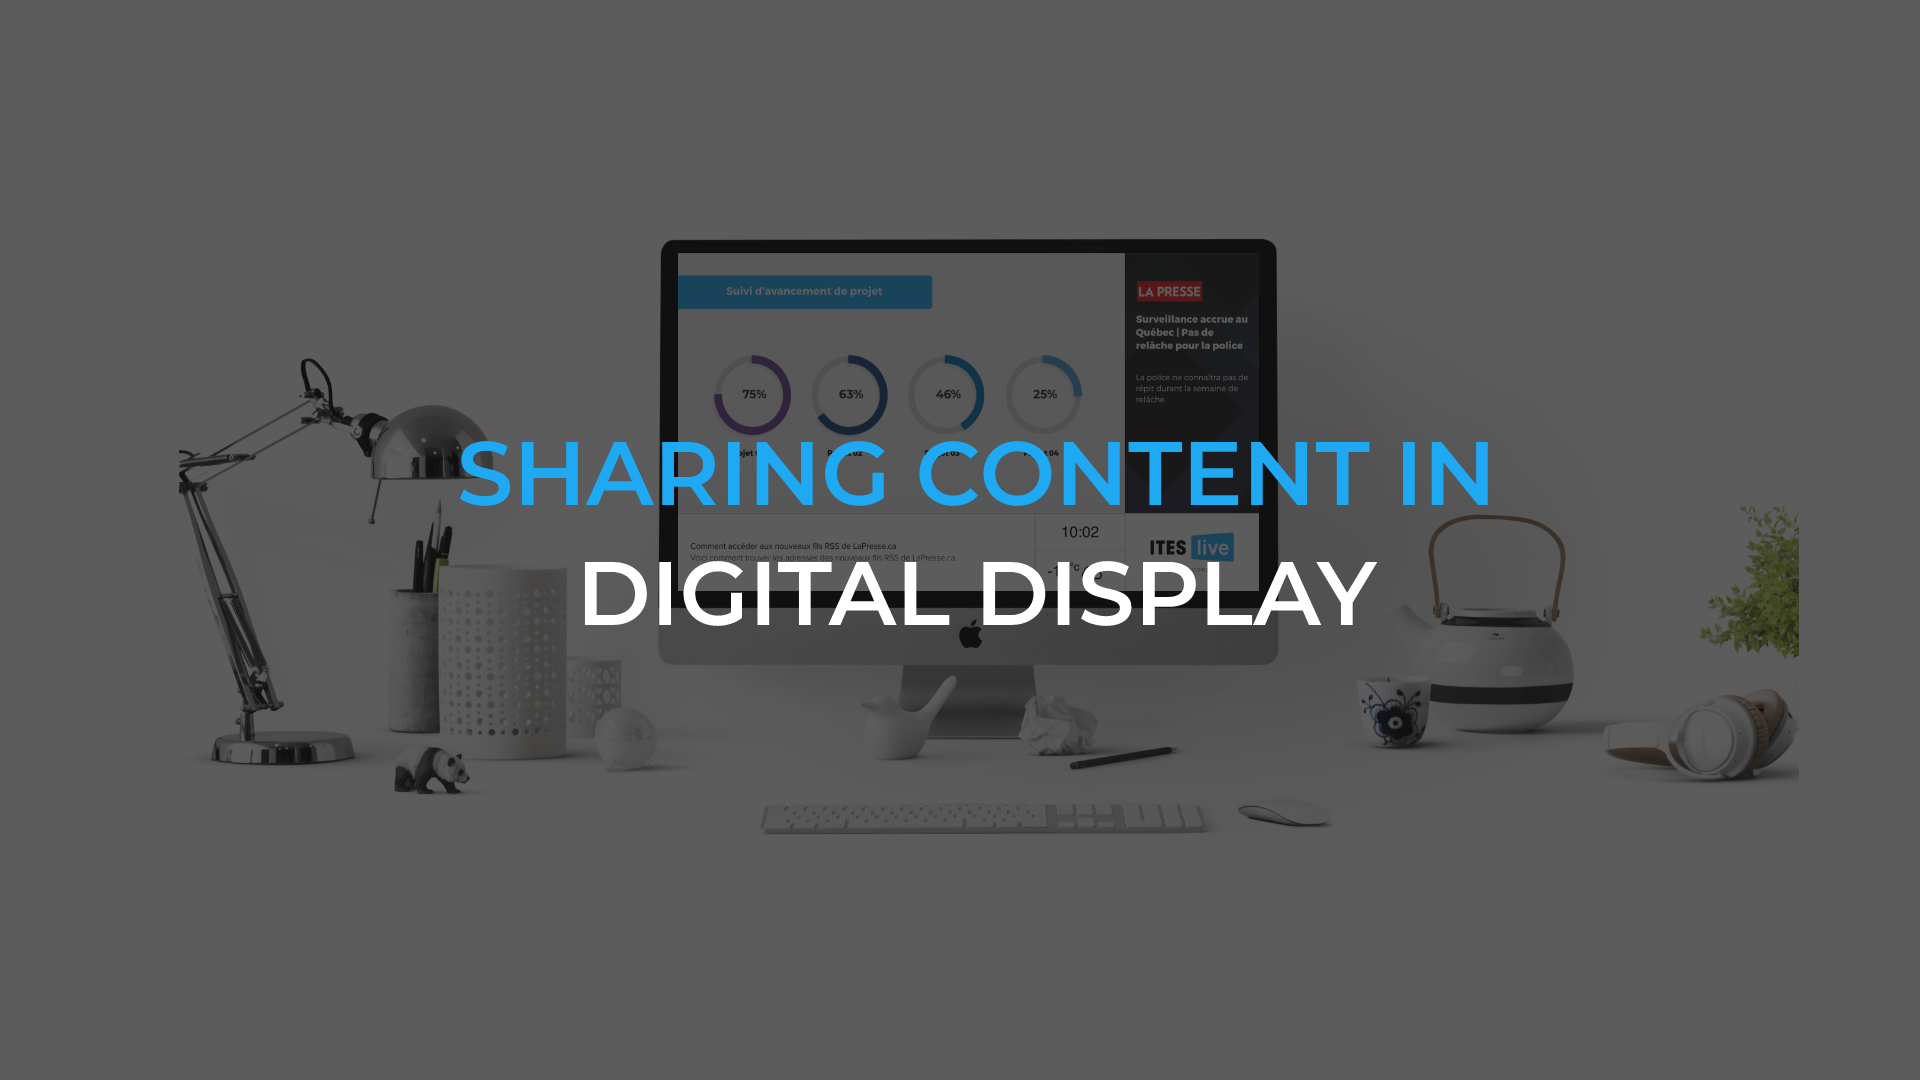 Sharing content in digital display